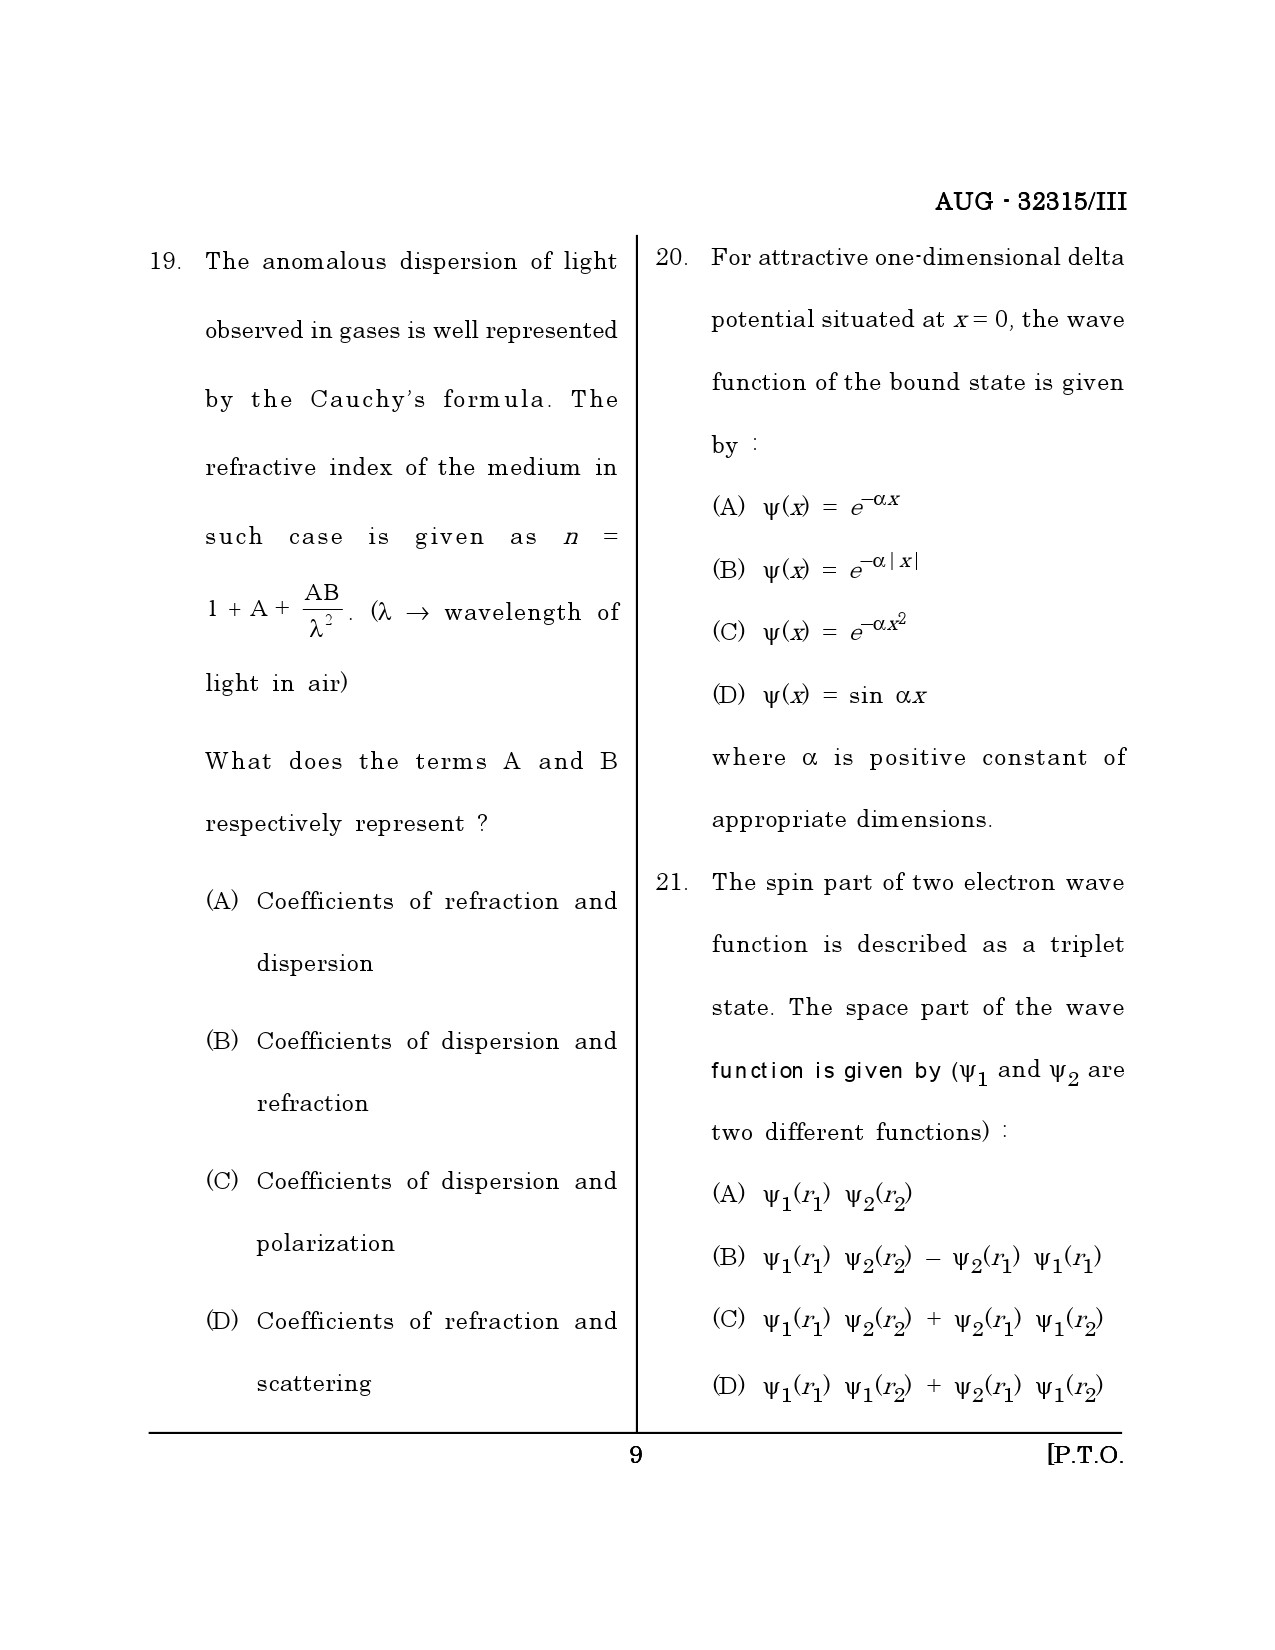 Maharashtra SET Physical Science Question Paper III August 2015 8